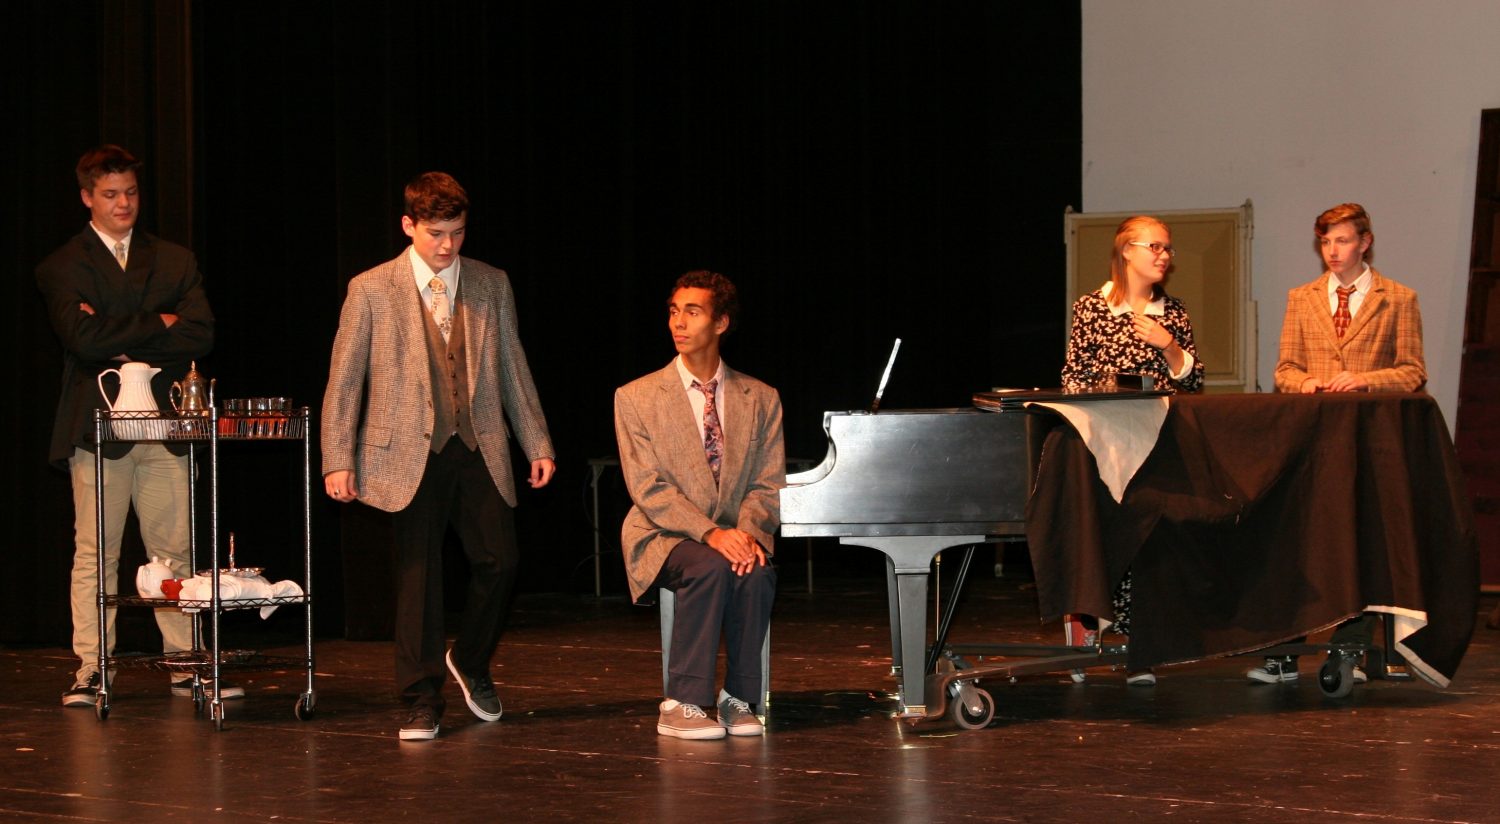 From left: Brandon Koran, Tanner Kuehmichel, Nathaniel Phillips, Kinsey Regehr-Hadden, and Hunter Karau practice a scene from “The Musical Comedy Murders of 1940.”